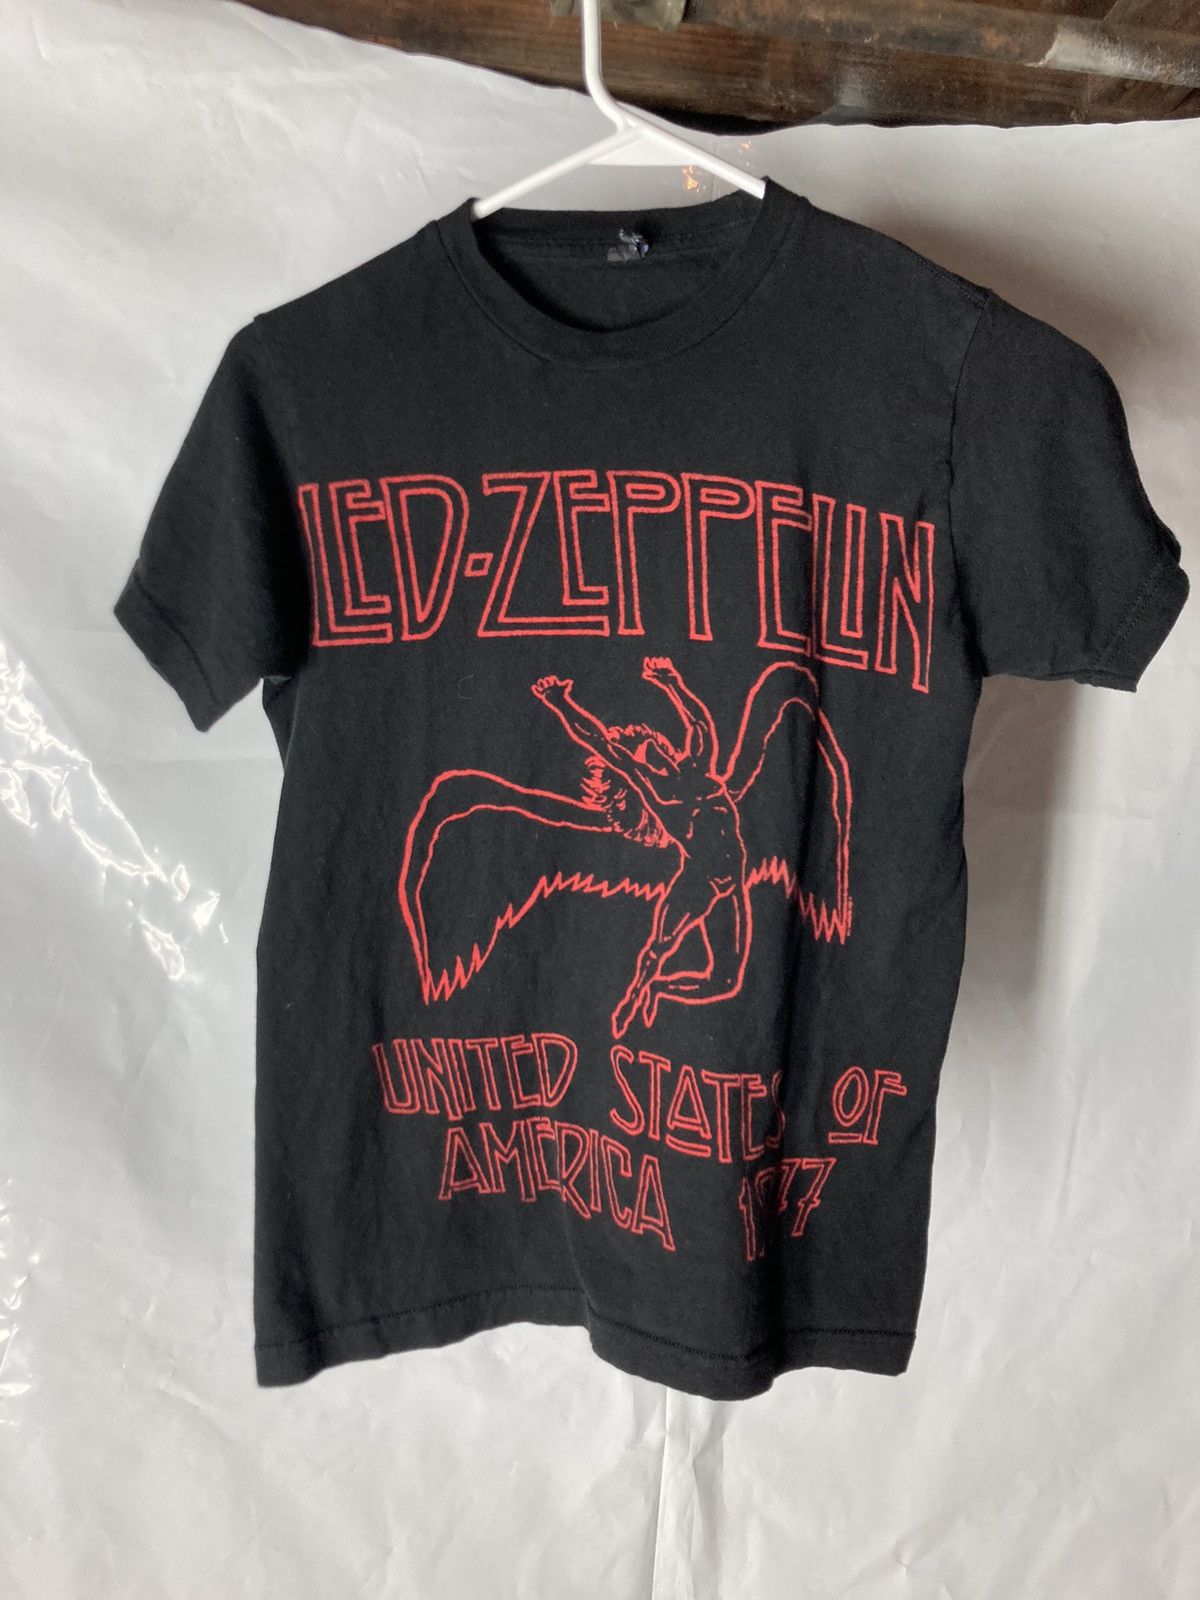 Vintage Led Zeppelin band tee shirt repro y2k size small black vtg Size US S / EU 44-46 / 1 - 1 Preview